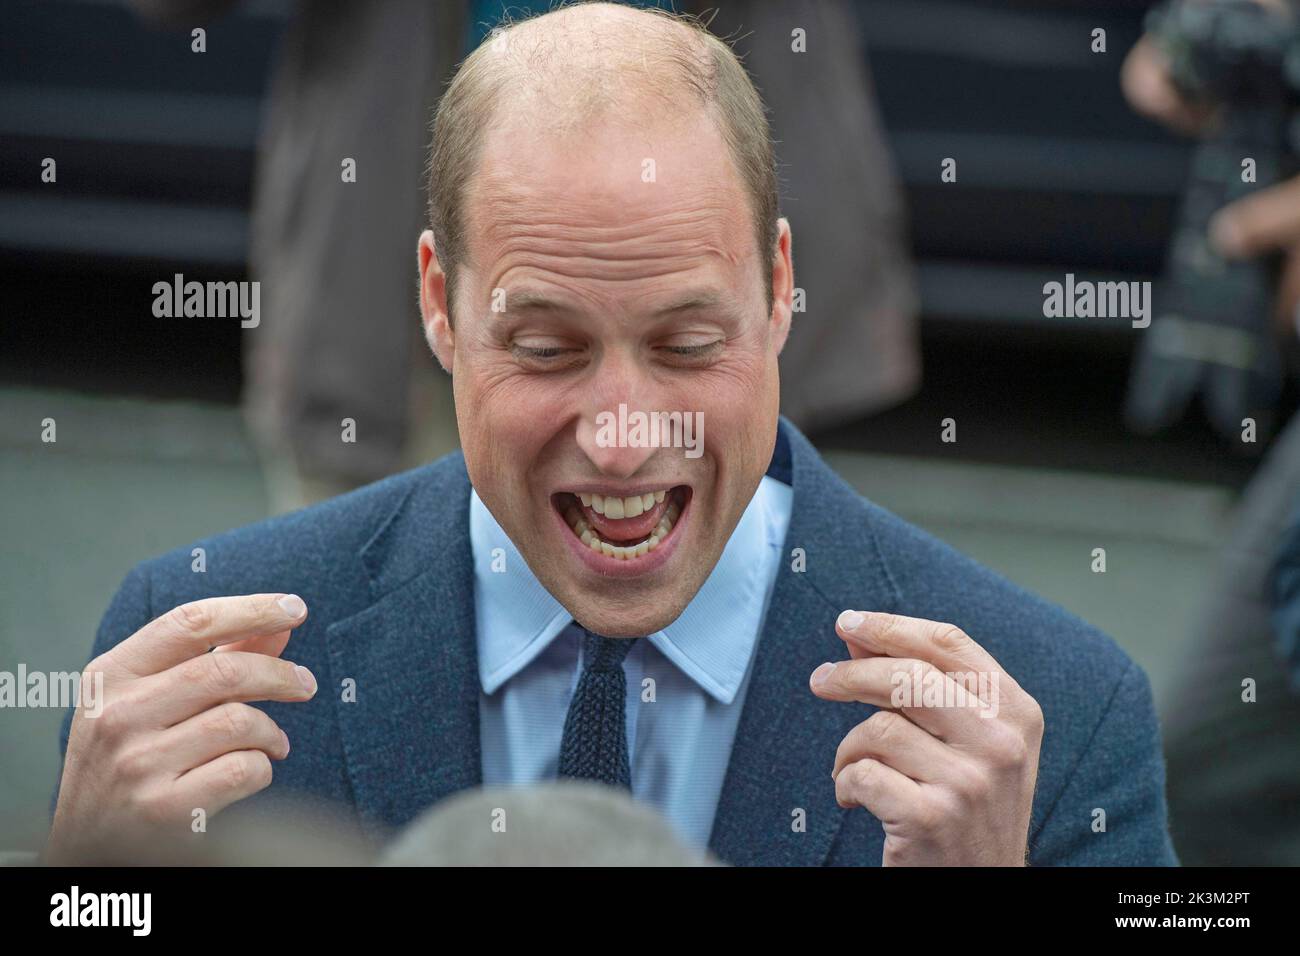 Swansea, UK. 27th Sep, 2022. Prince William and Catherine Princess of Wales during their visit to Swansea this afternoon. The royal pair visited St Thomas church in Swansea which supports people in the local area and across Swansea. Credit: Phil Rees/Alamy Live News Stock Photo